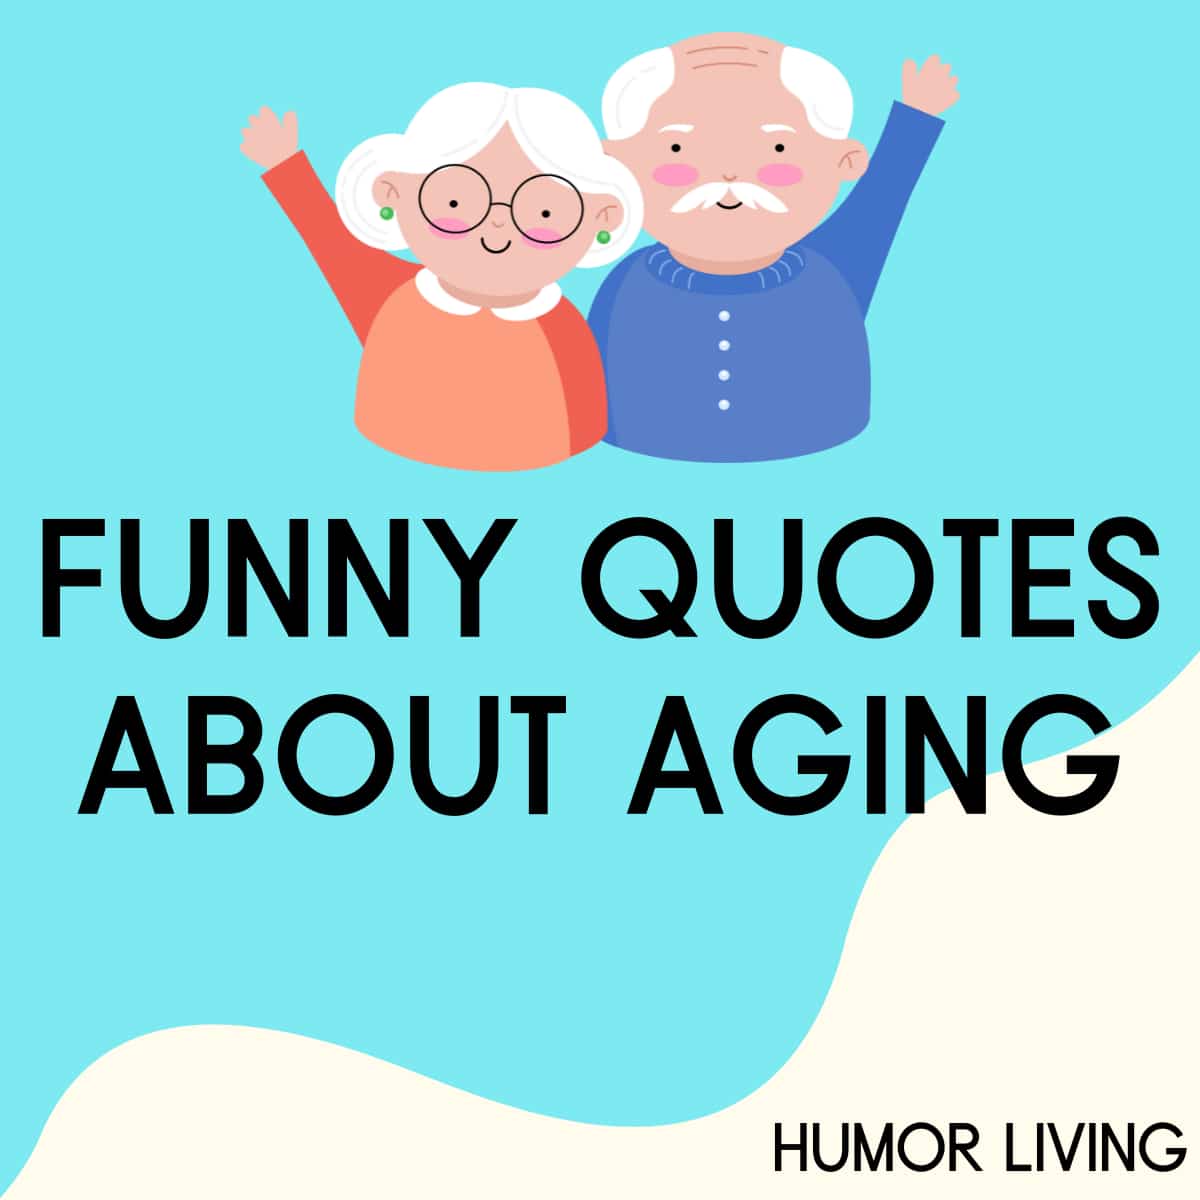 70+ Funny Quotes About Aging and Getting Older - Humor Living